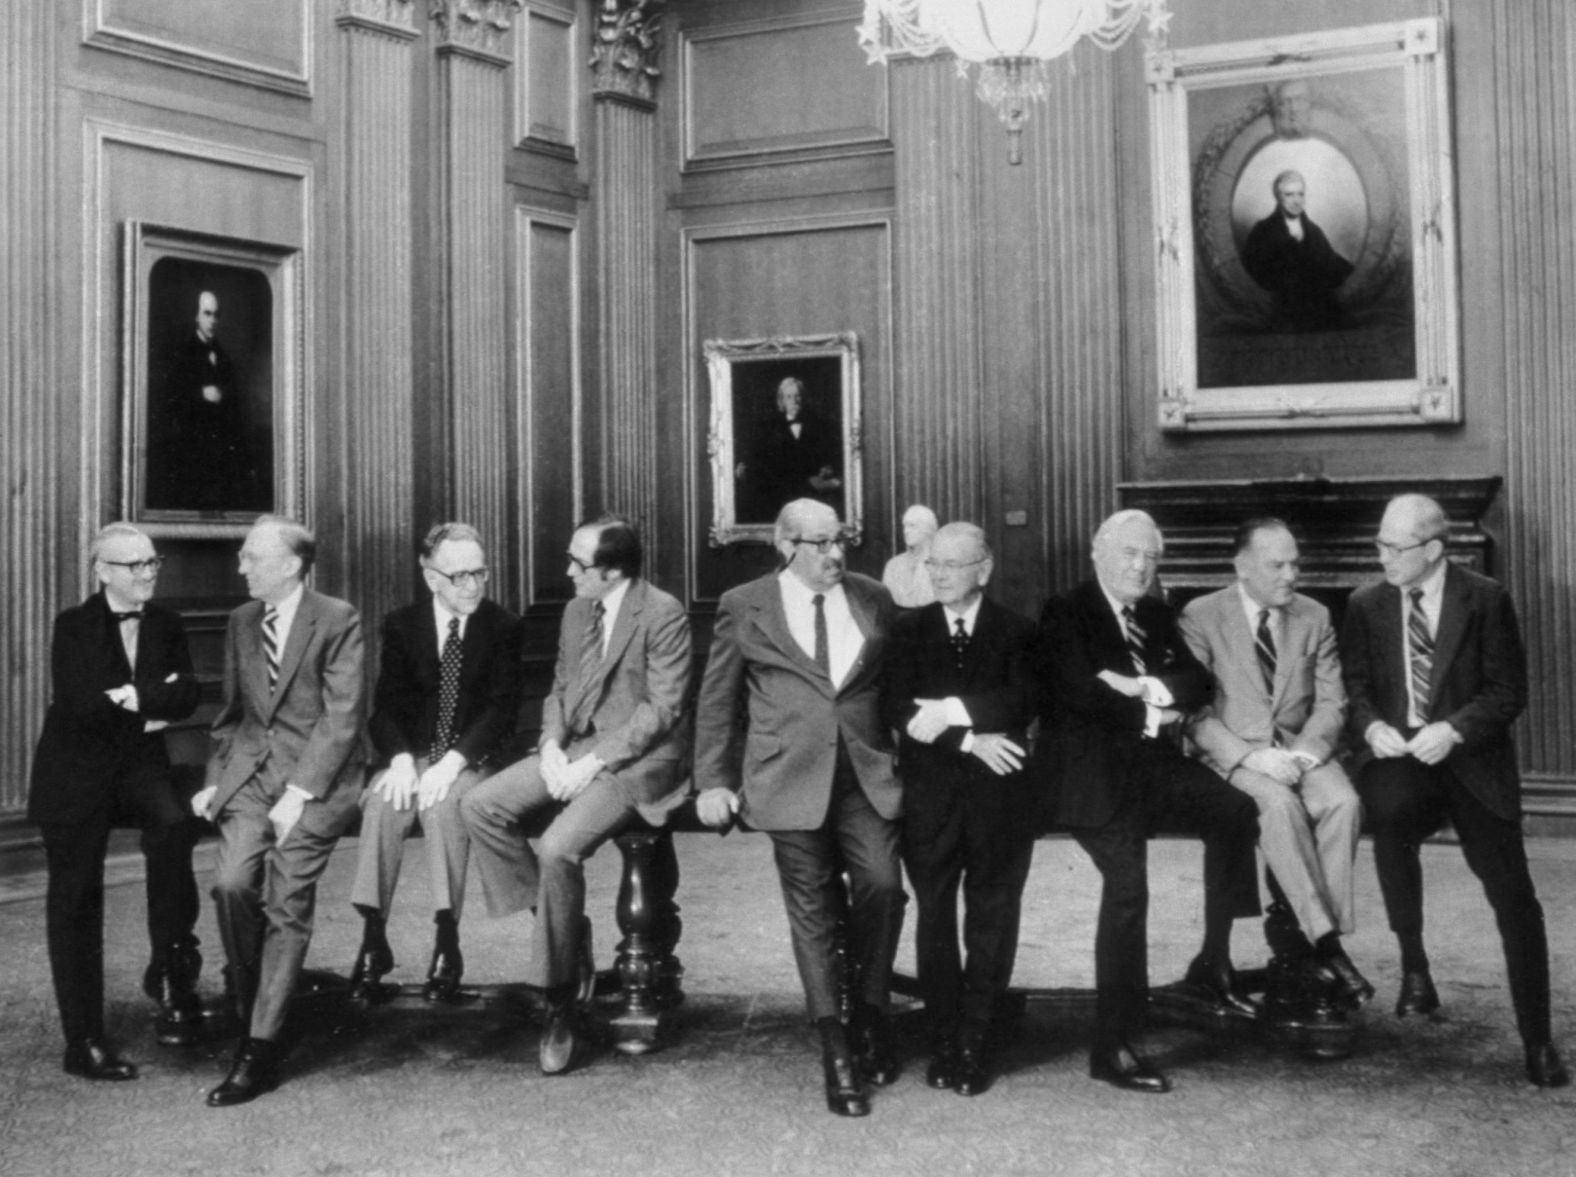 The US Supreme Court poses in 1977 for what is believed to be the first casual portrait of the entire court. Left to right: Associate Justices Stevens, Lewis Powell, Henry Blackburn, William Rehnquist, Thurgood Marshall and William Brennan; Chief Justice Warren Burger; and Associate Justices Potter Stewart and Byron White. 